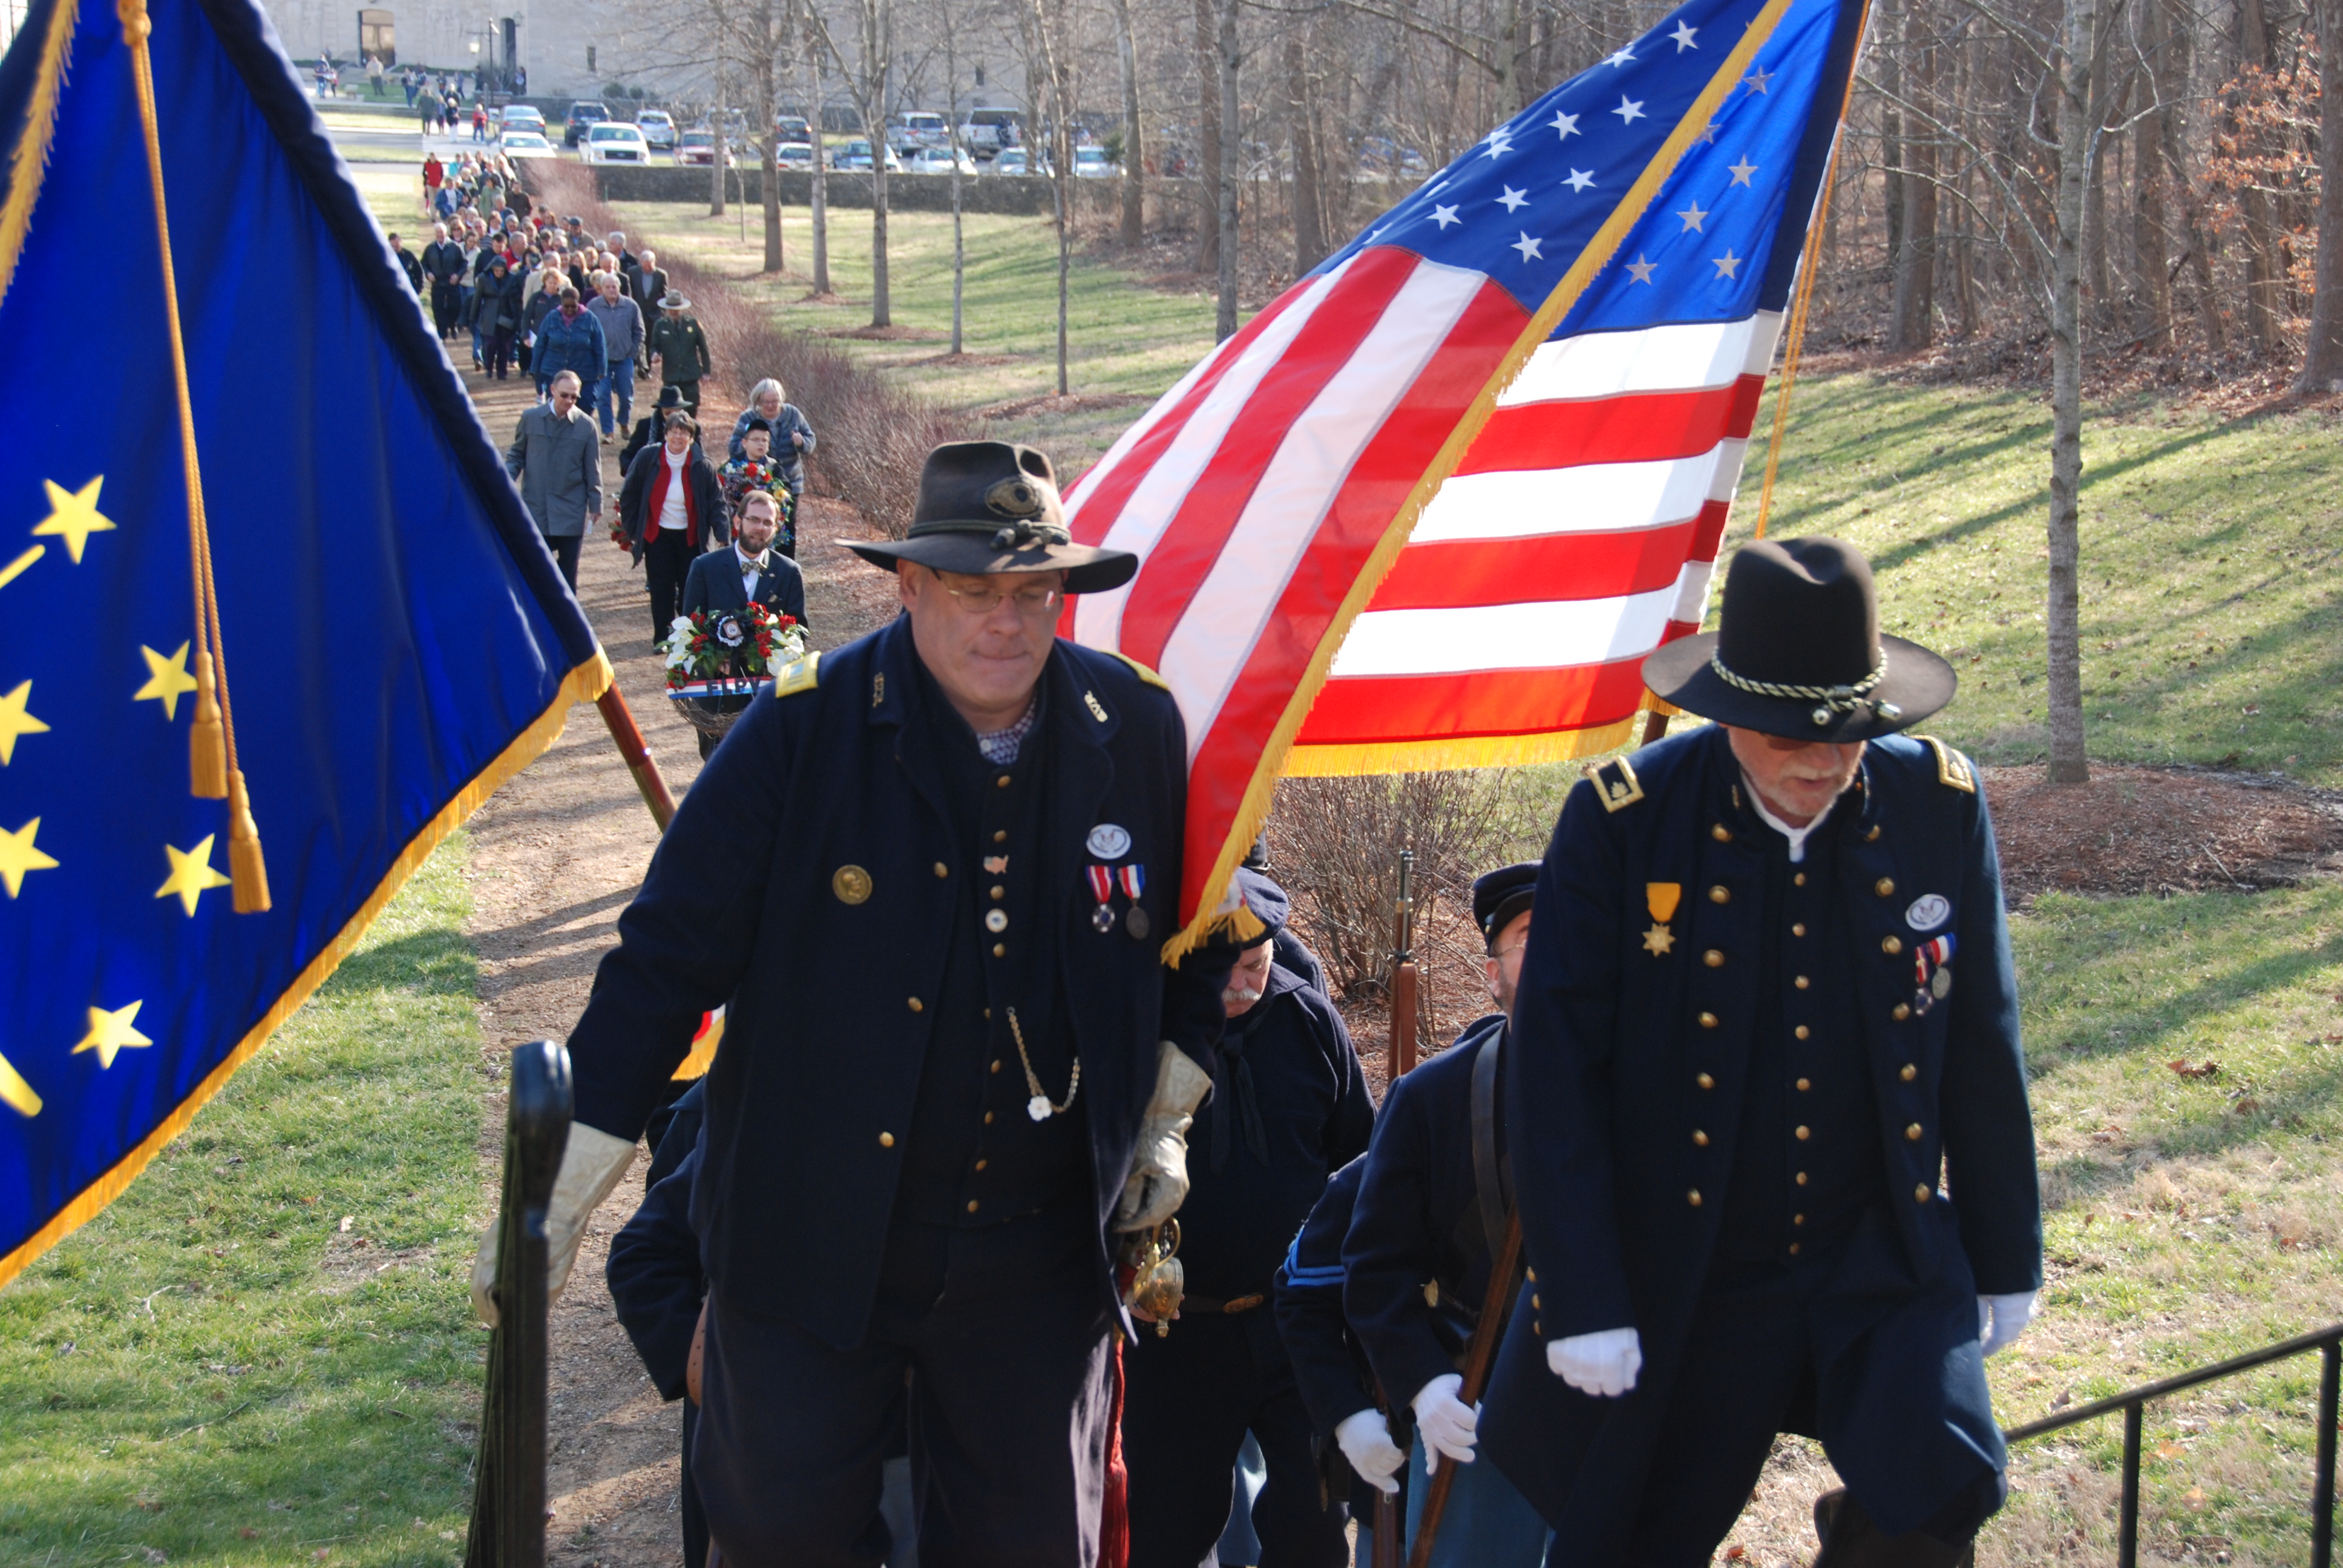 Walk to Nancy Hanks Lincoln's Grave from Memorial Building during Lincoln Day event